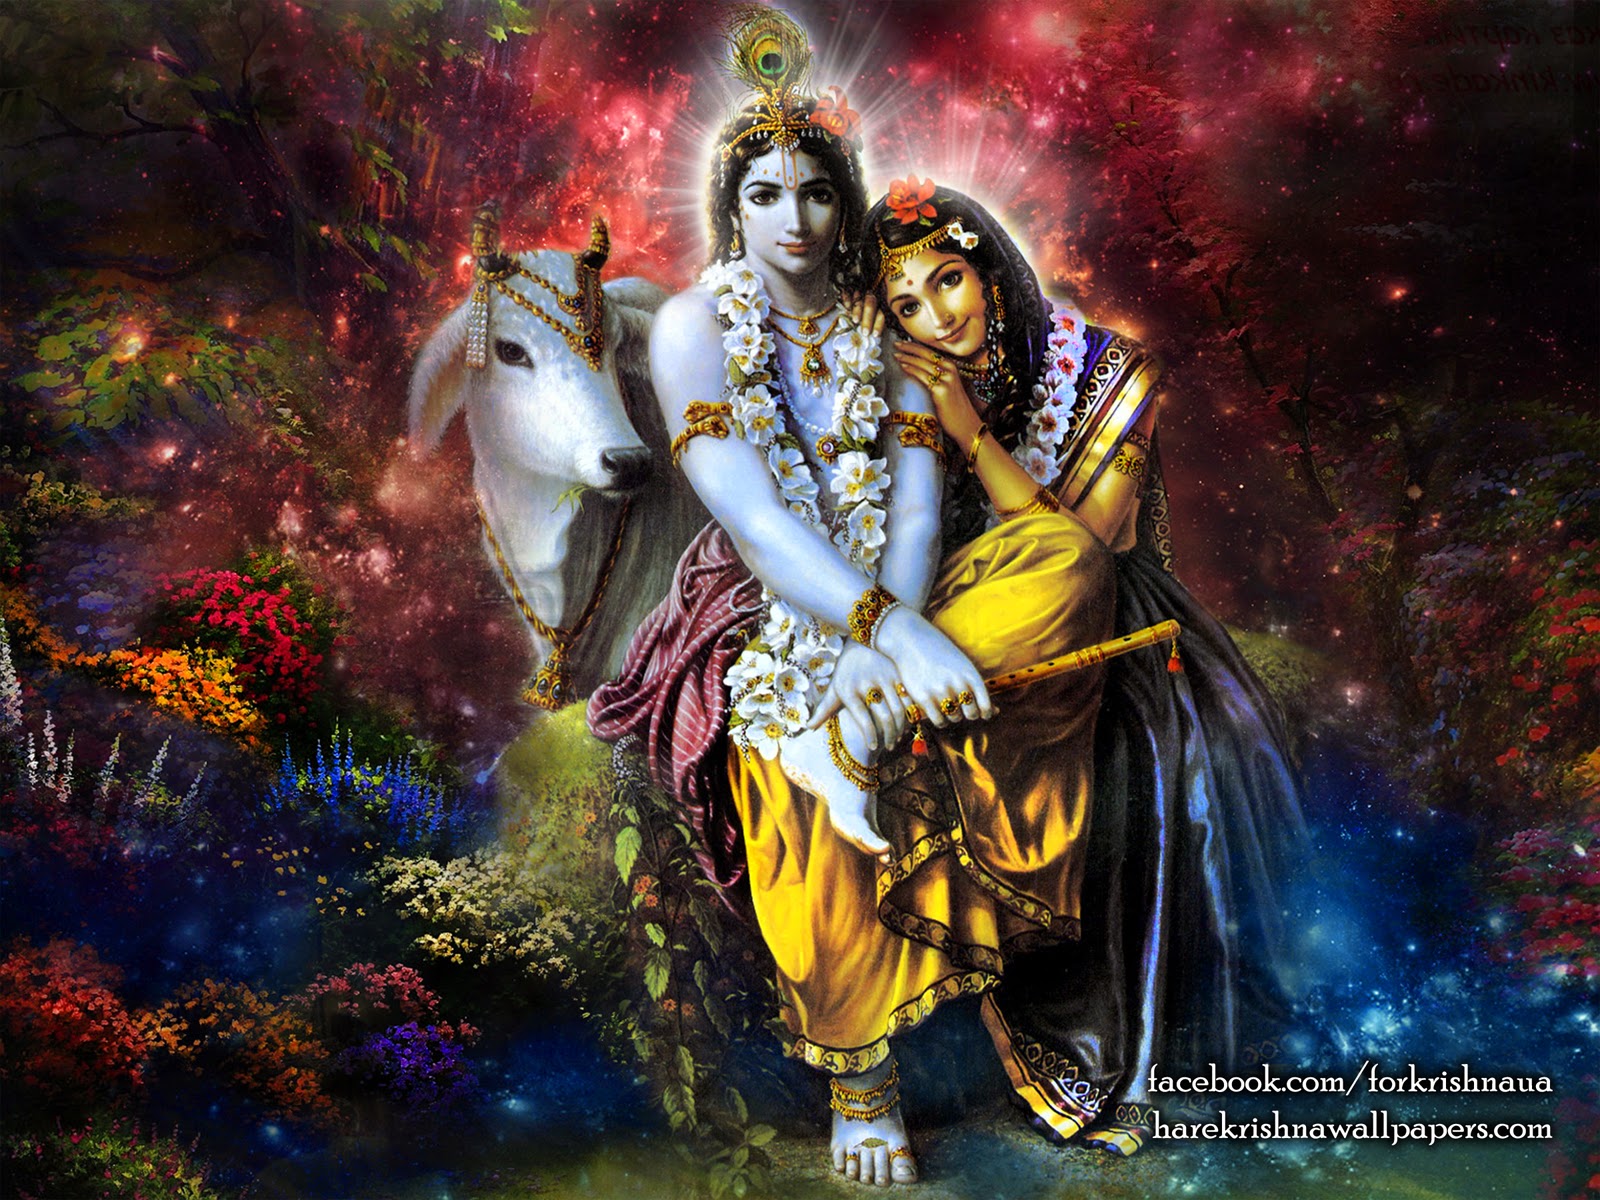 HOW MANY OF YOU KNOW ABOUT KRISHNA?